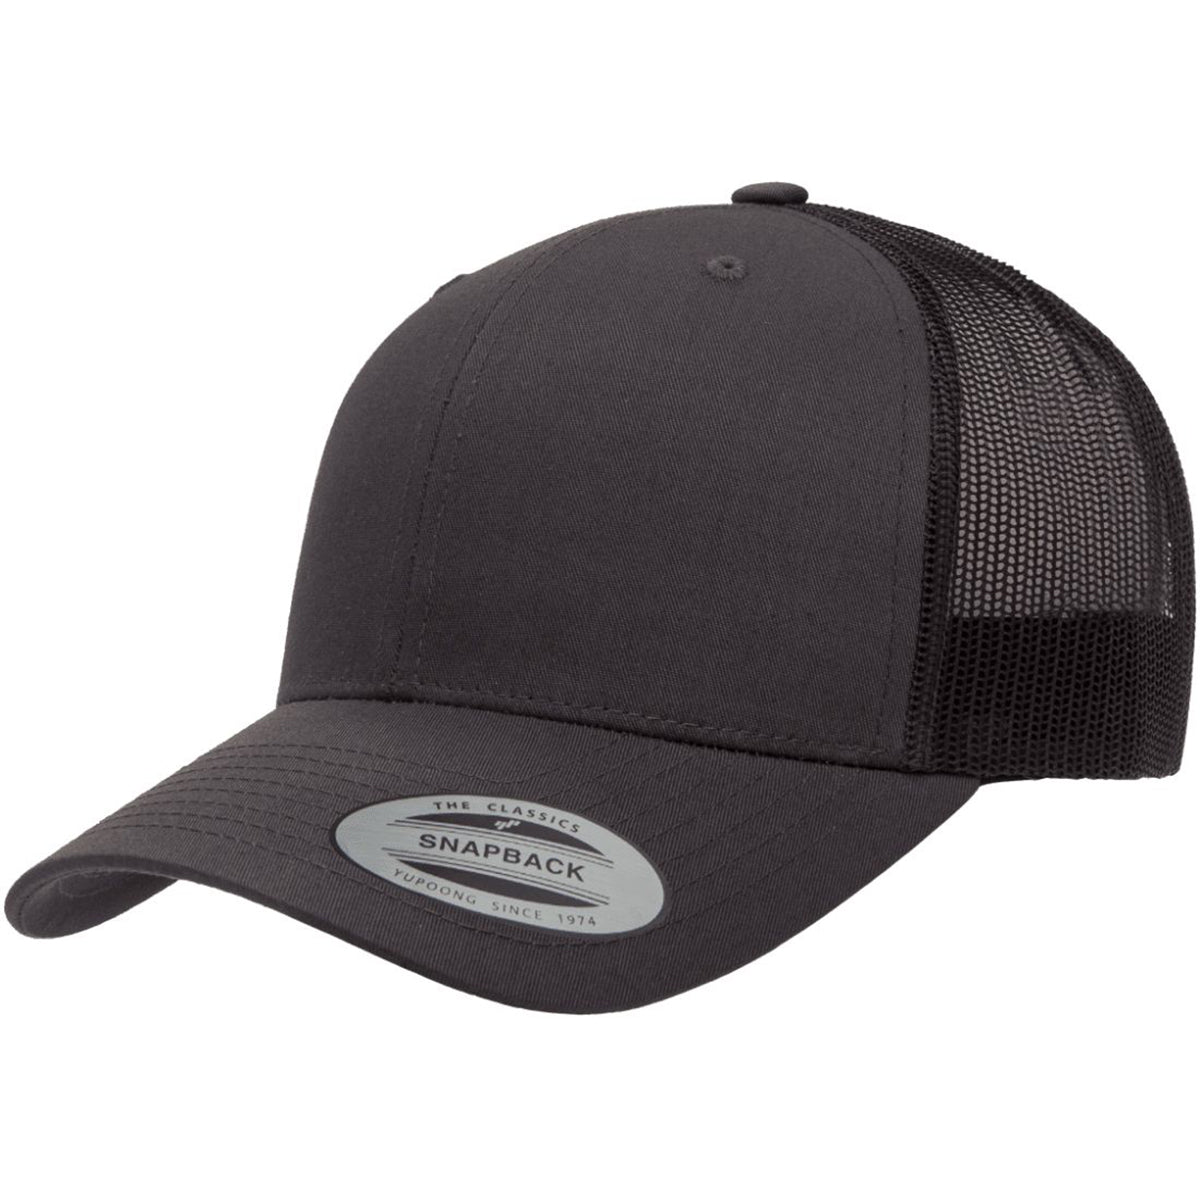 YP CLASSICS 6606 LEATHER Designs HAT Hells As | $18 PATCH as Canyon each Low 